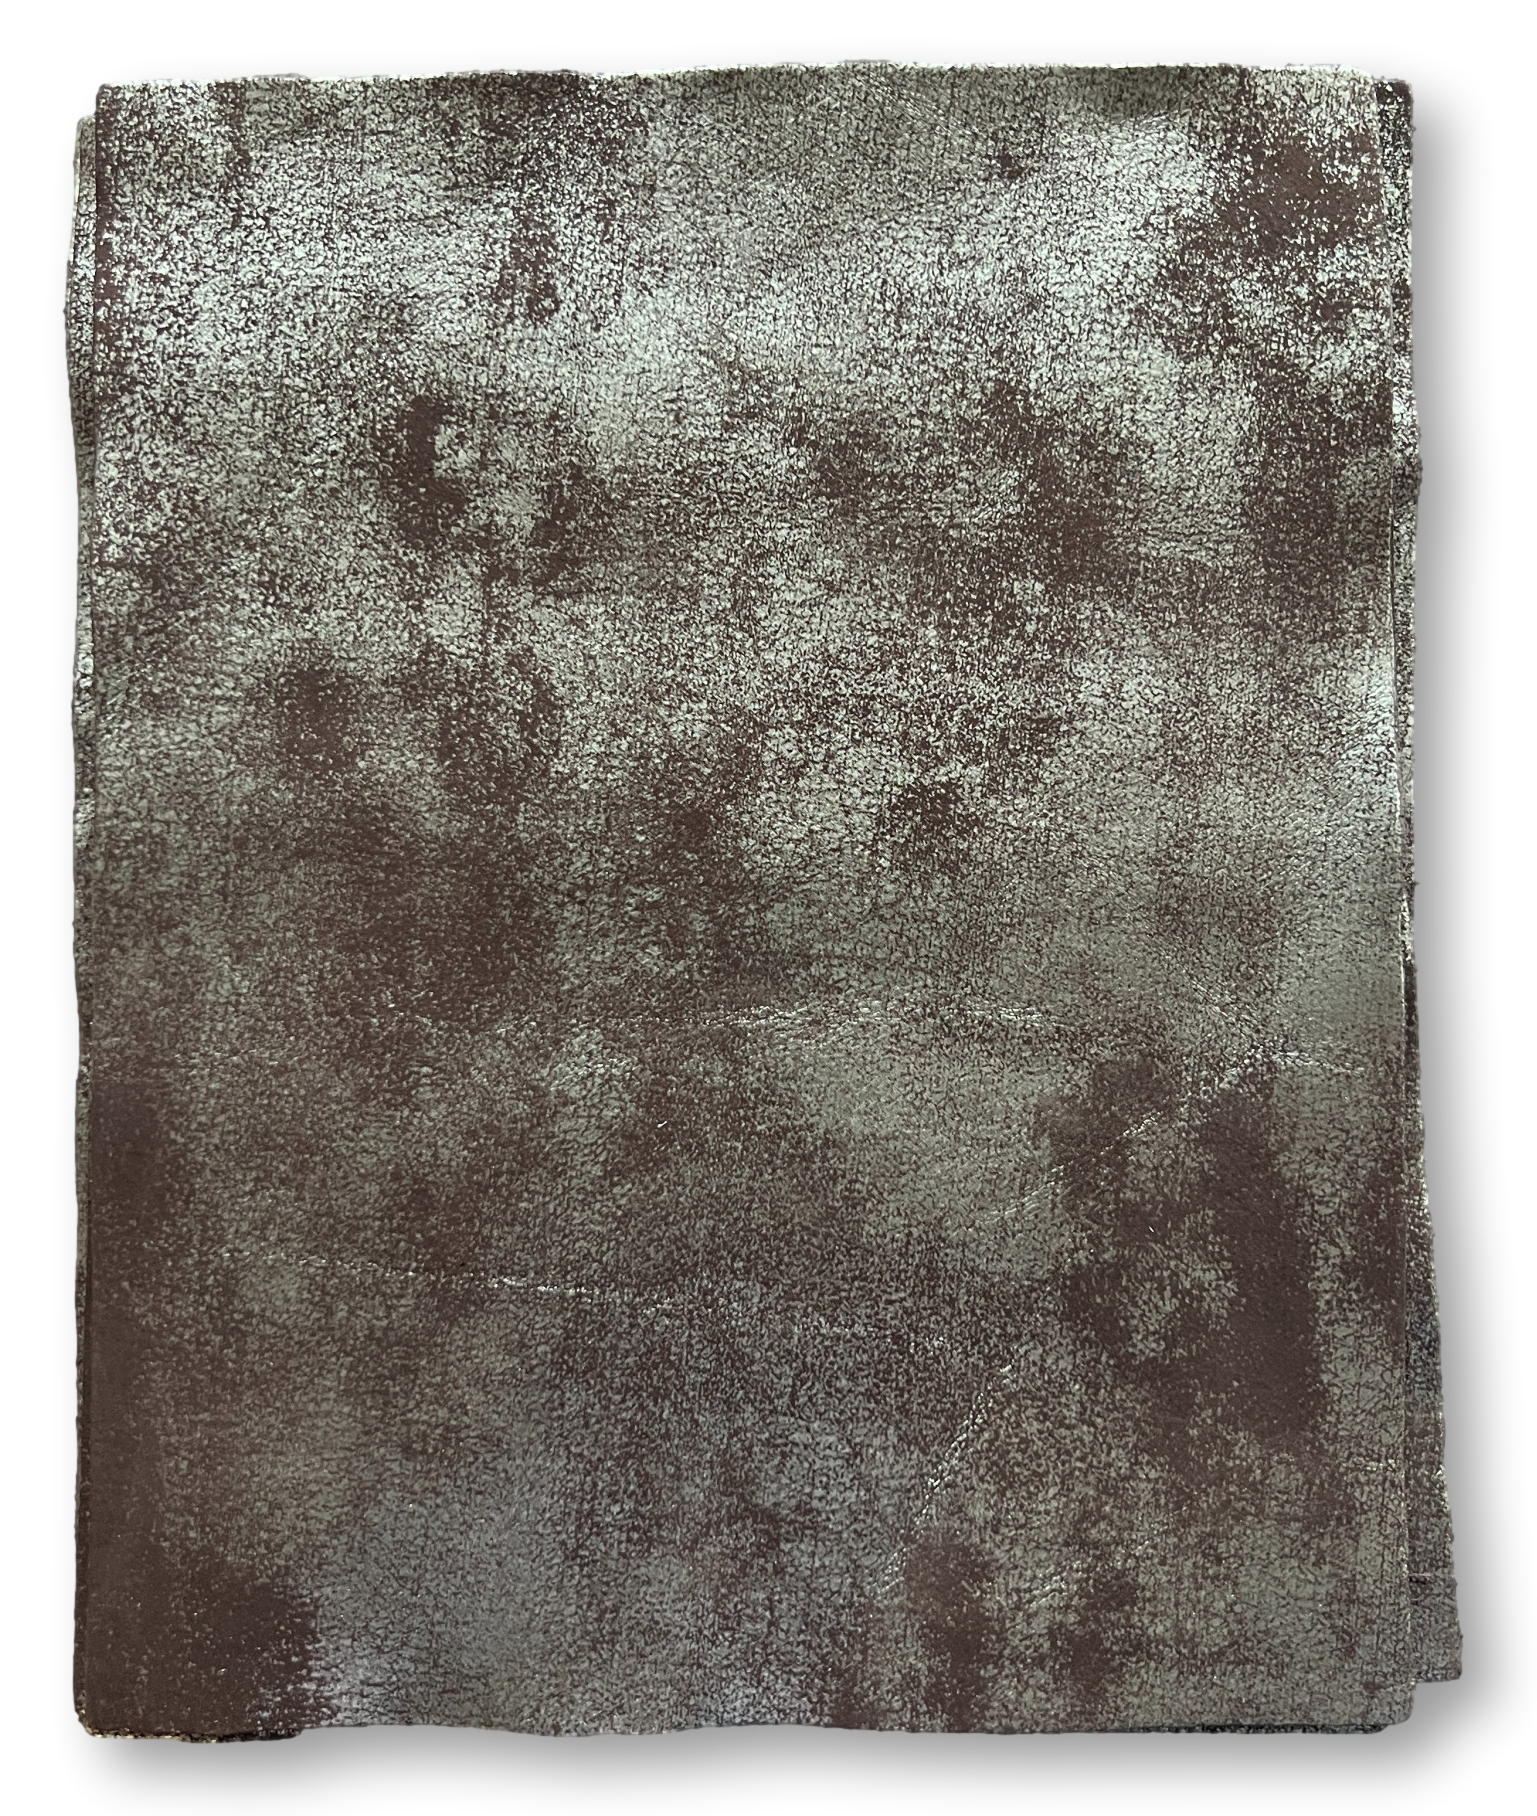 Dark Brown/Gold Distressed Metallic Cowhide Leather: 8.5" x 11" Pre-Cut Pieces